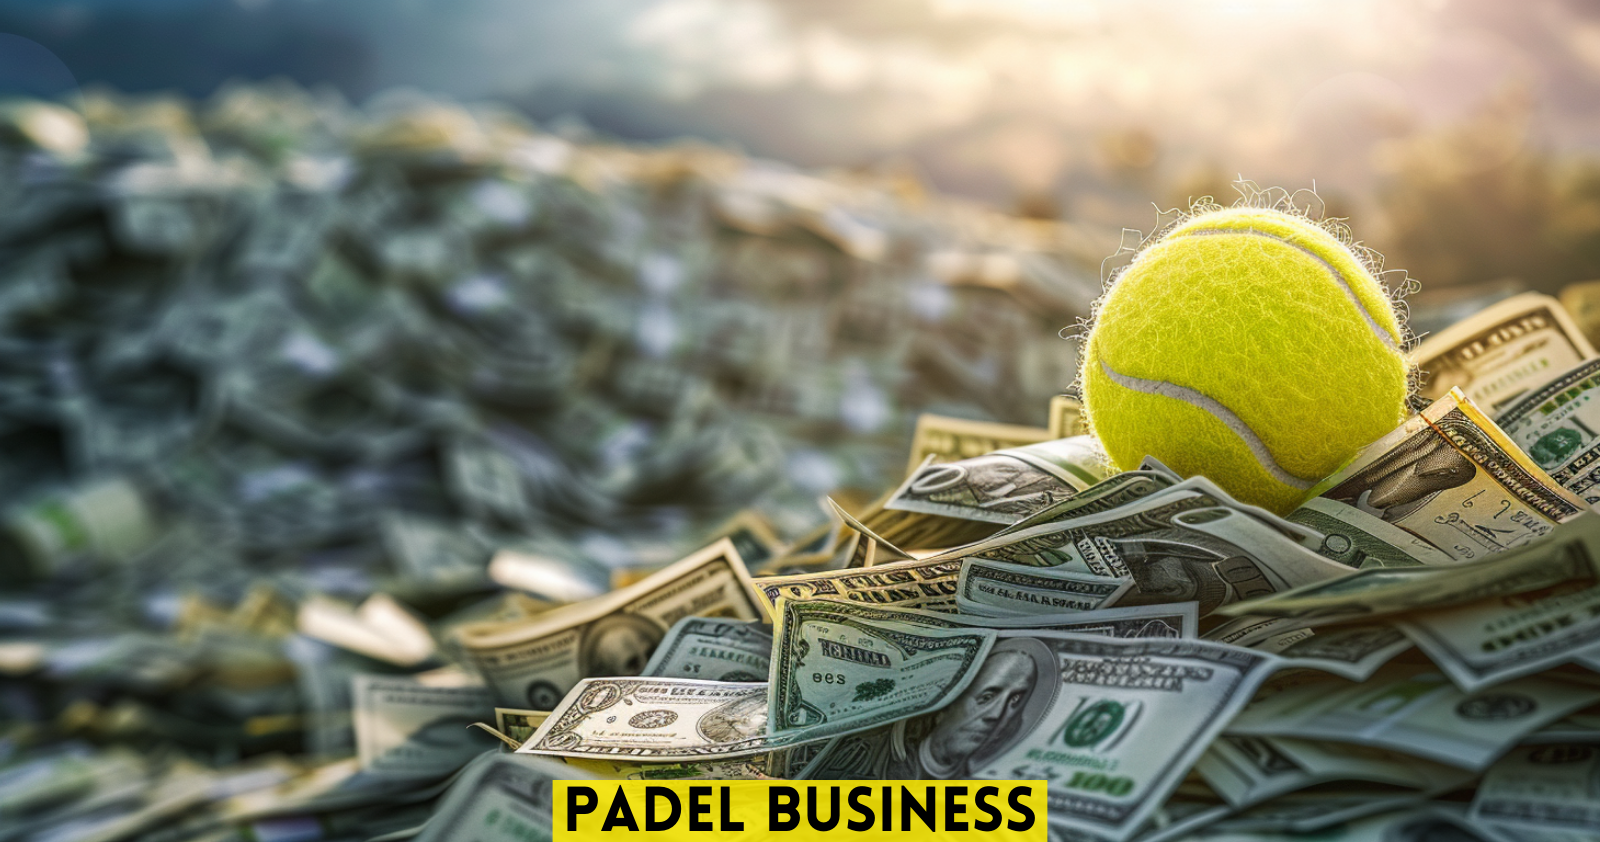 Padel Business blog to help entrepreneurs launching padel their club with padel courts